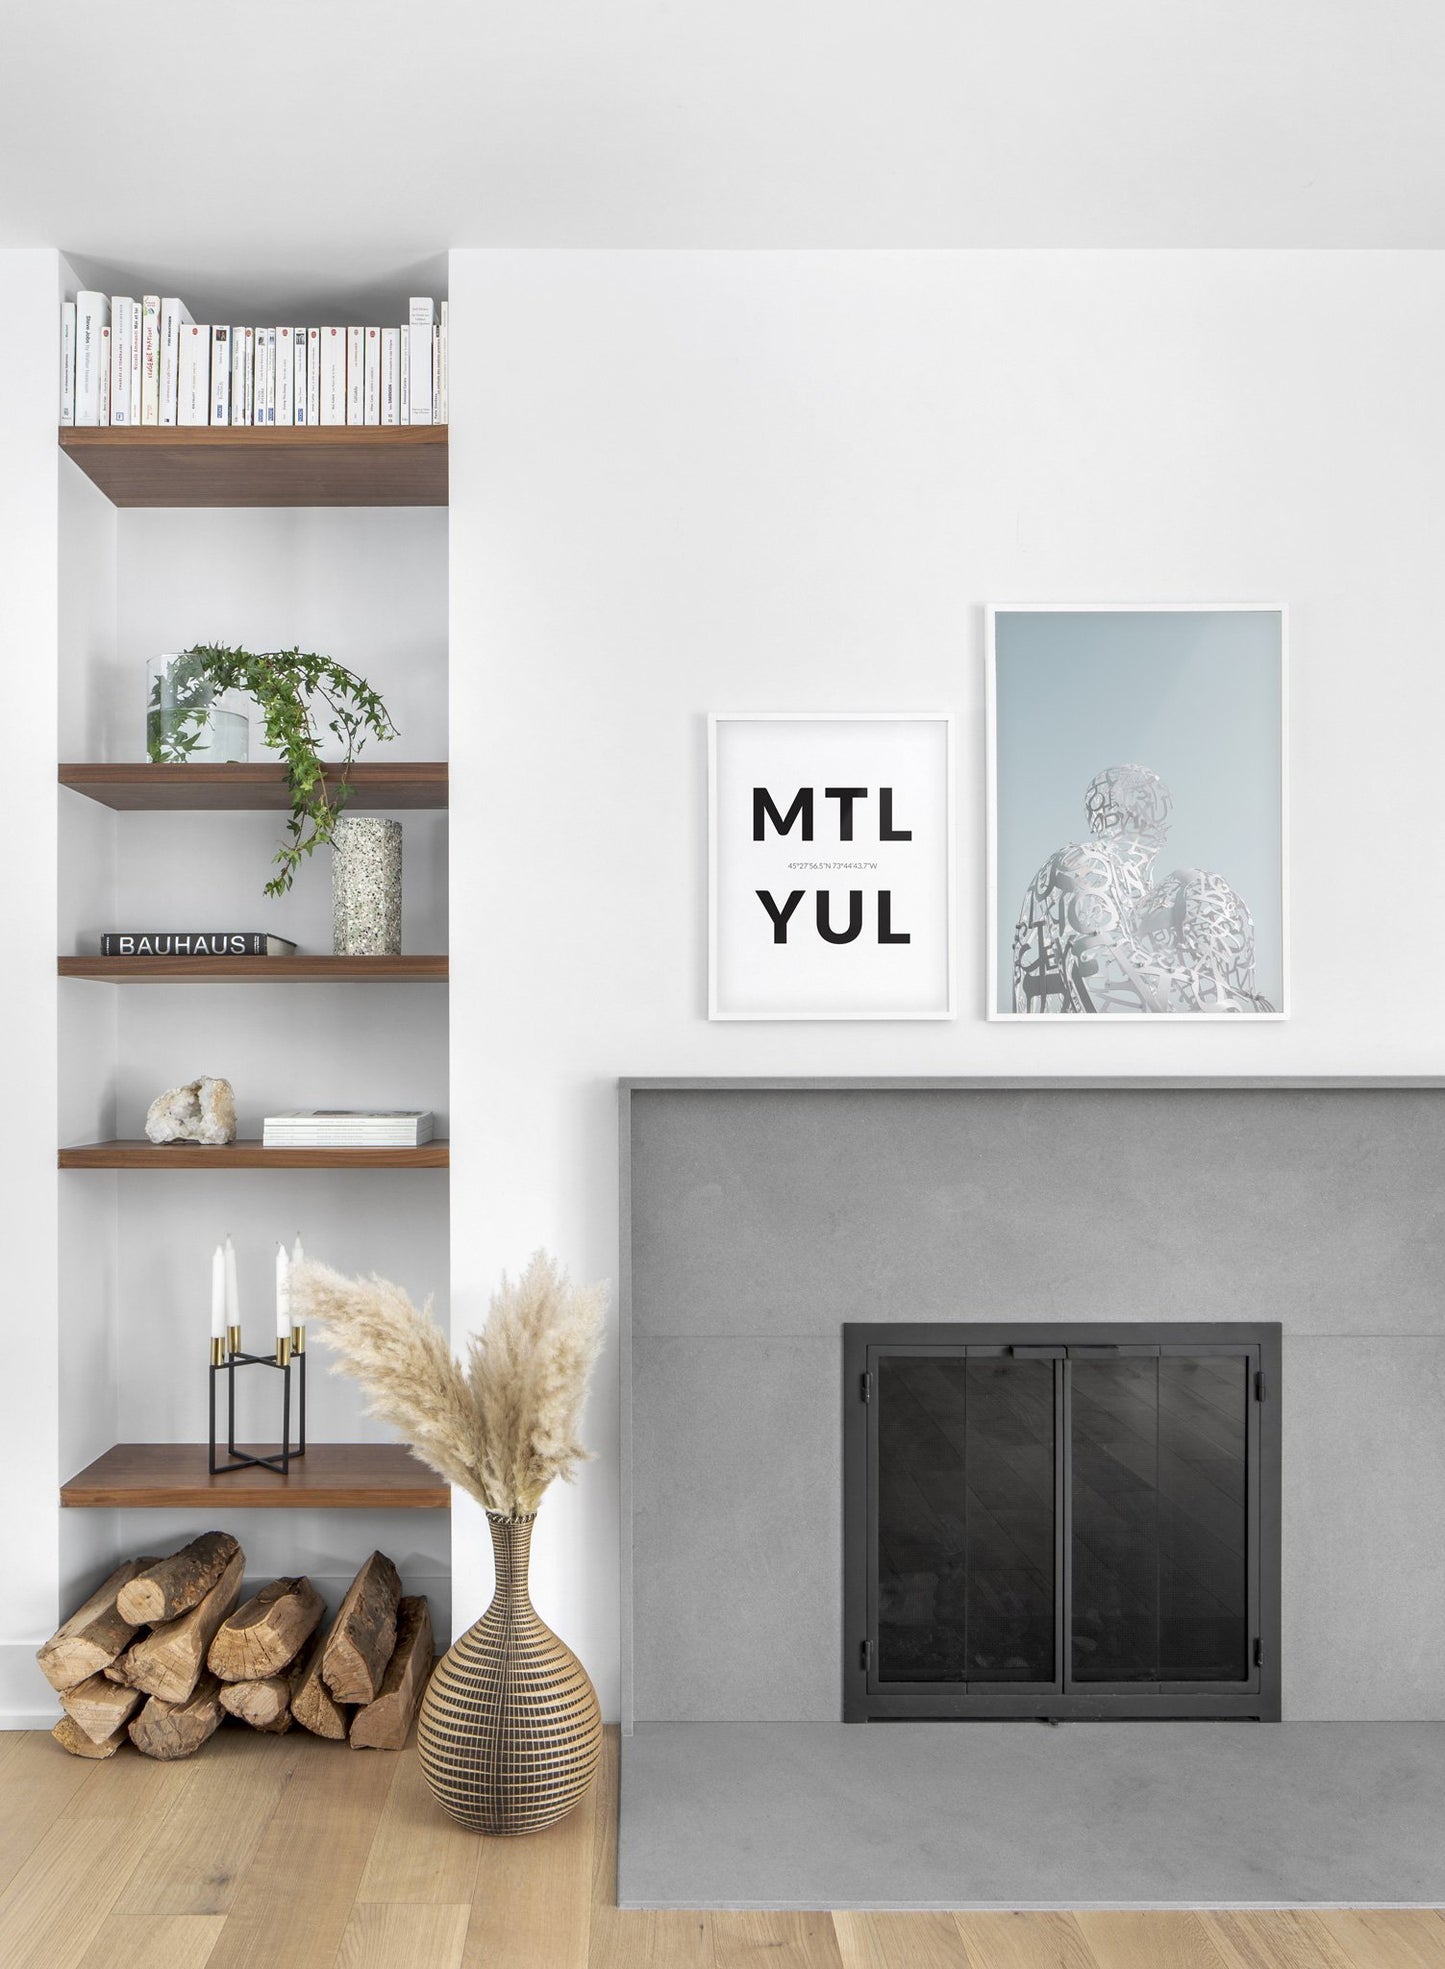 Bonaventure Legacy modern minimalist photography poster by Opposite Wall - Living room